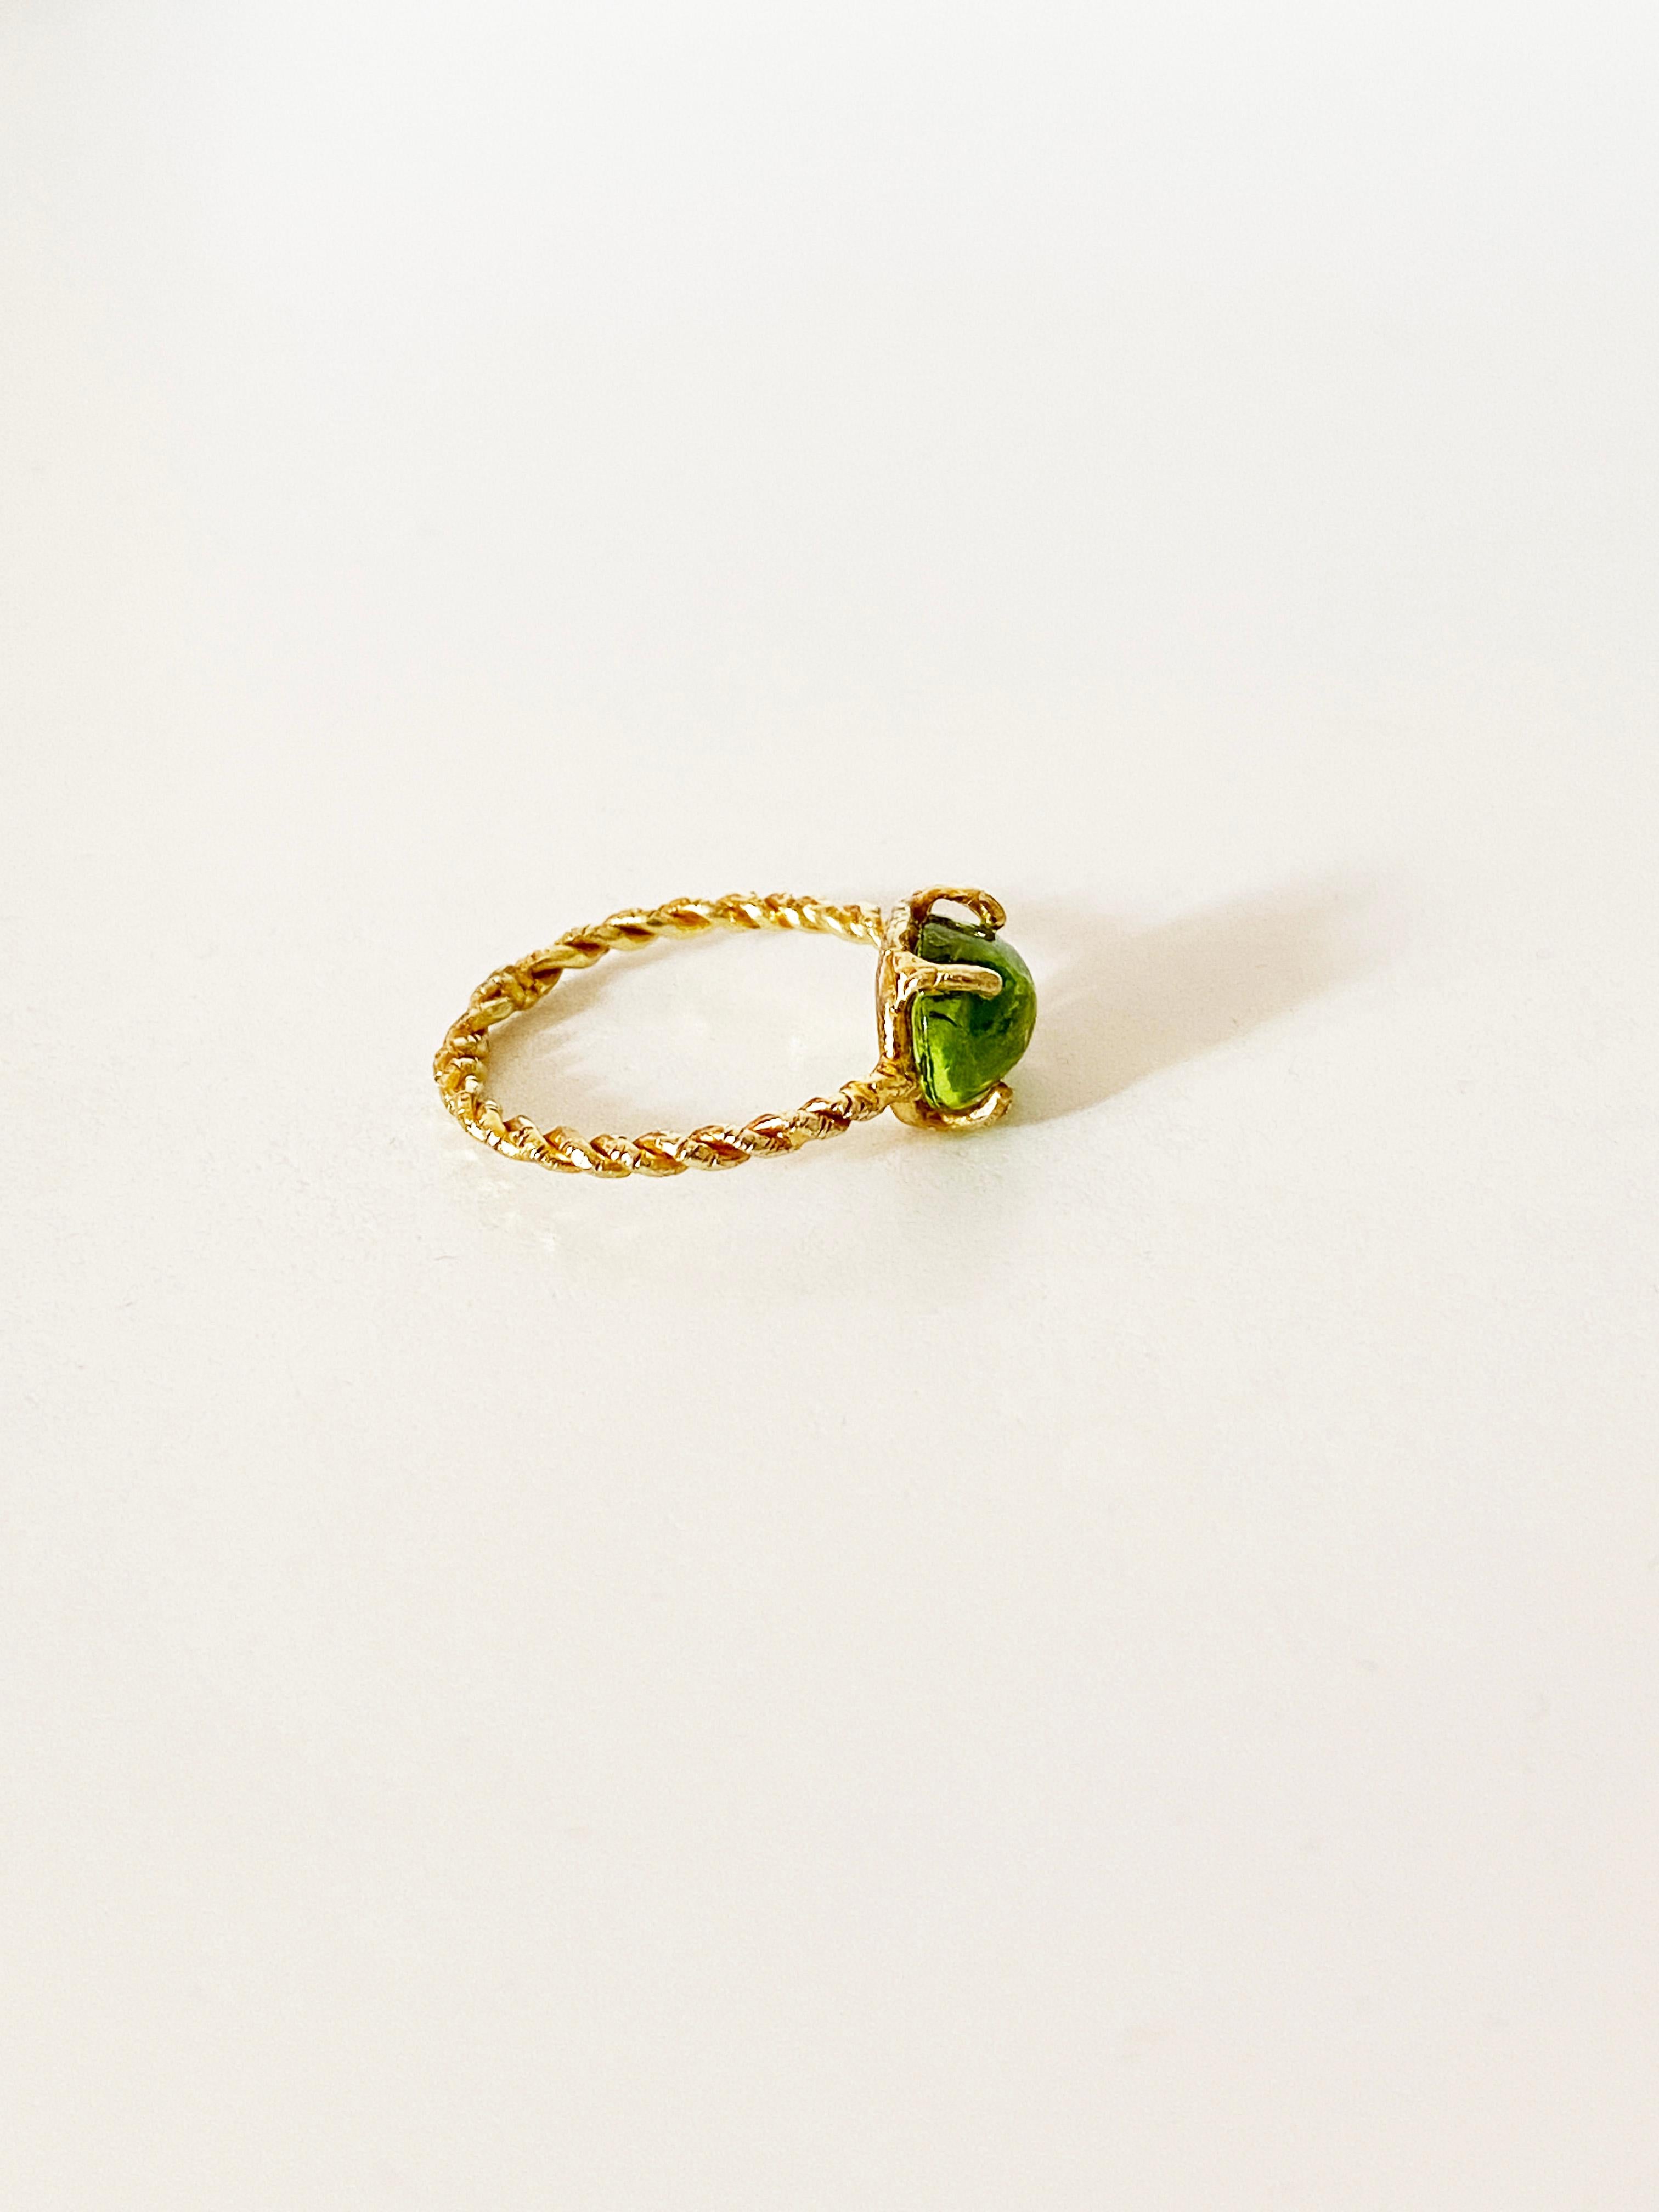 Artisan Rossella Ugolini 18K Yellow Gold Delicate Unique Peridot Ring Nature Inspired For Sale